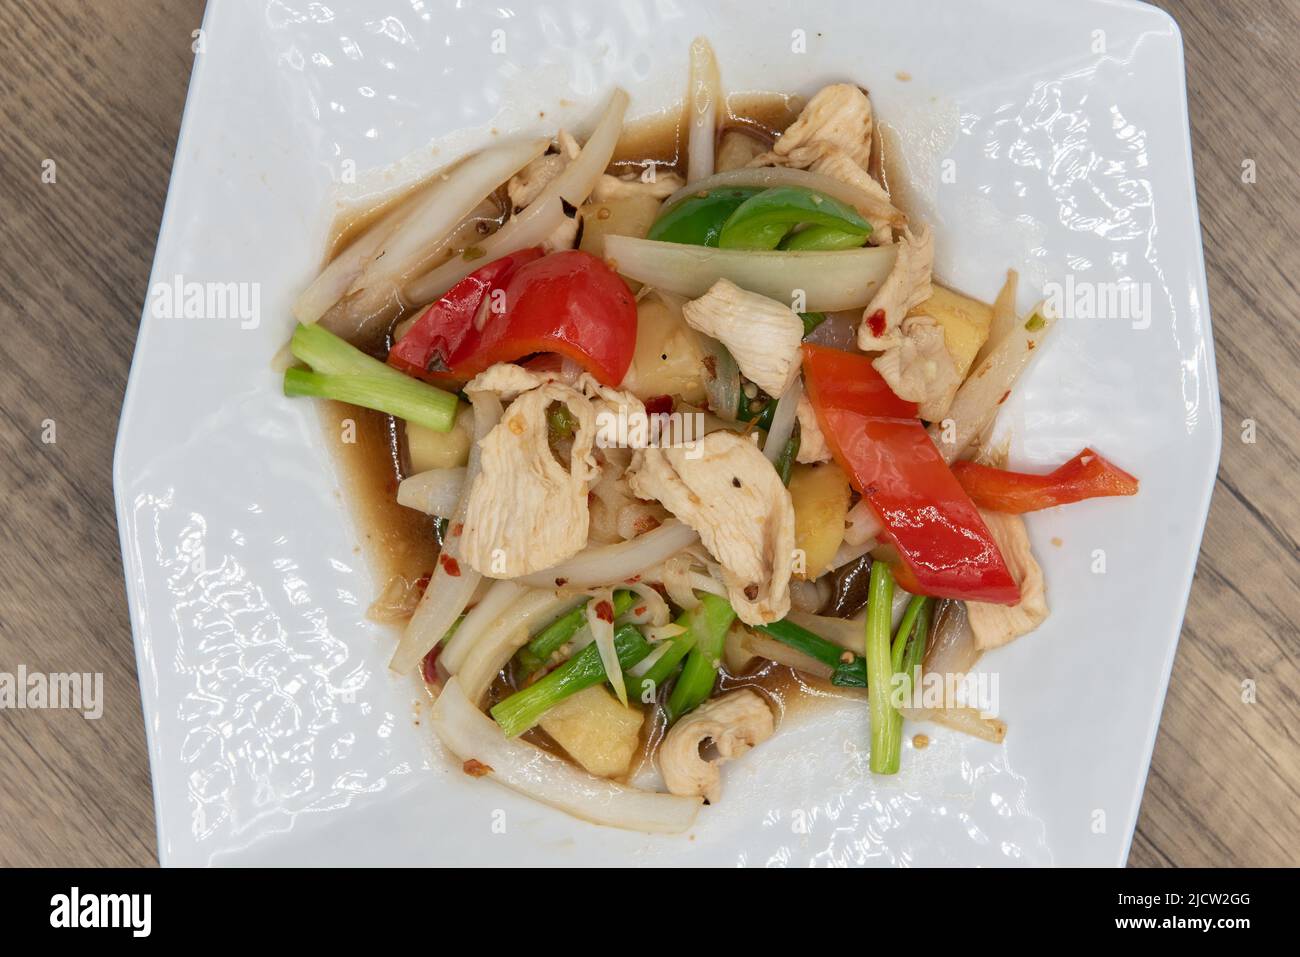 Overhead view of spicy plate of chicken with vegetable stir fry, topped with pineapple and ready to eat. Stock Photo